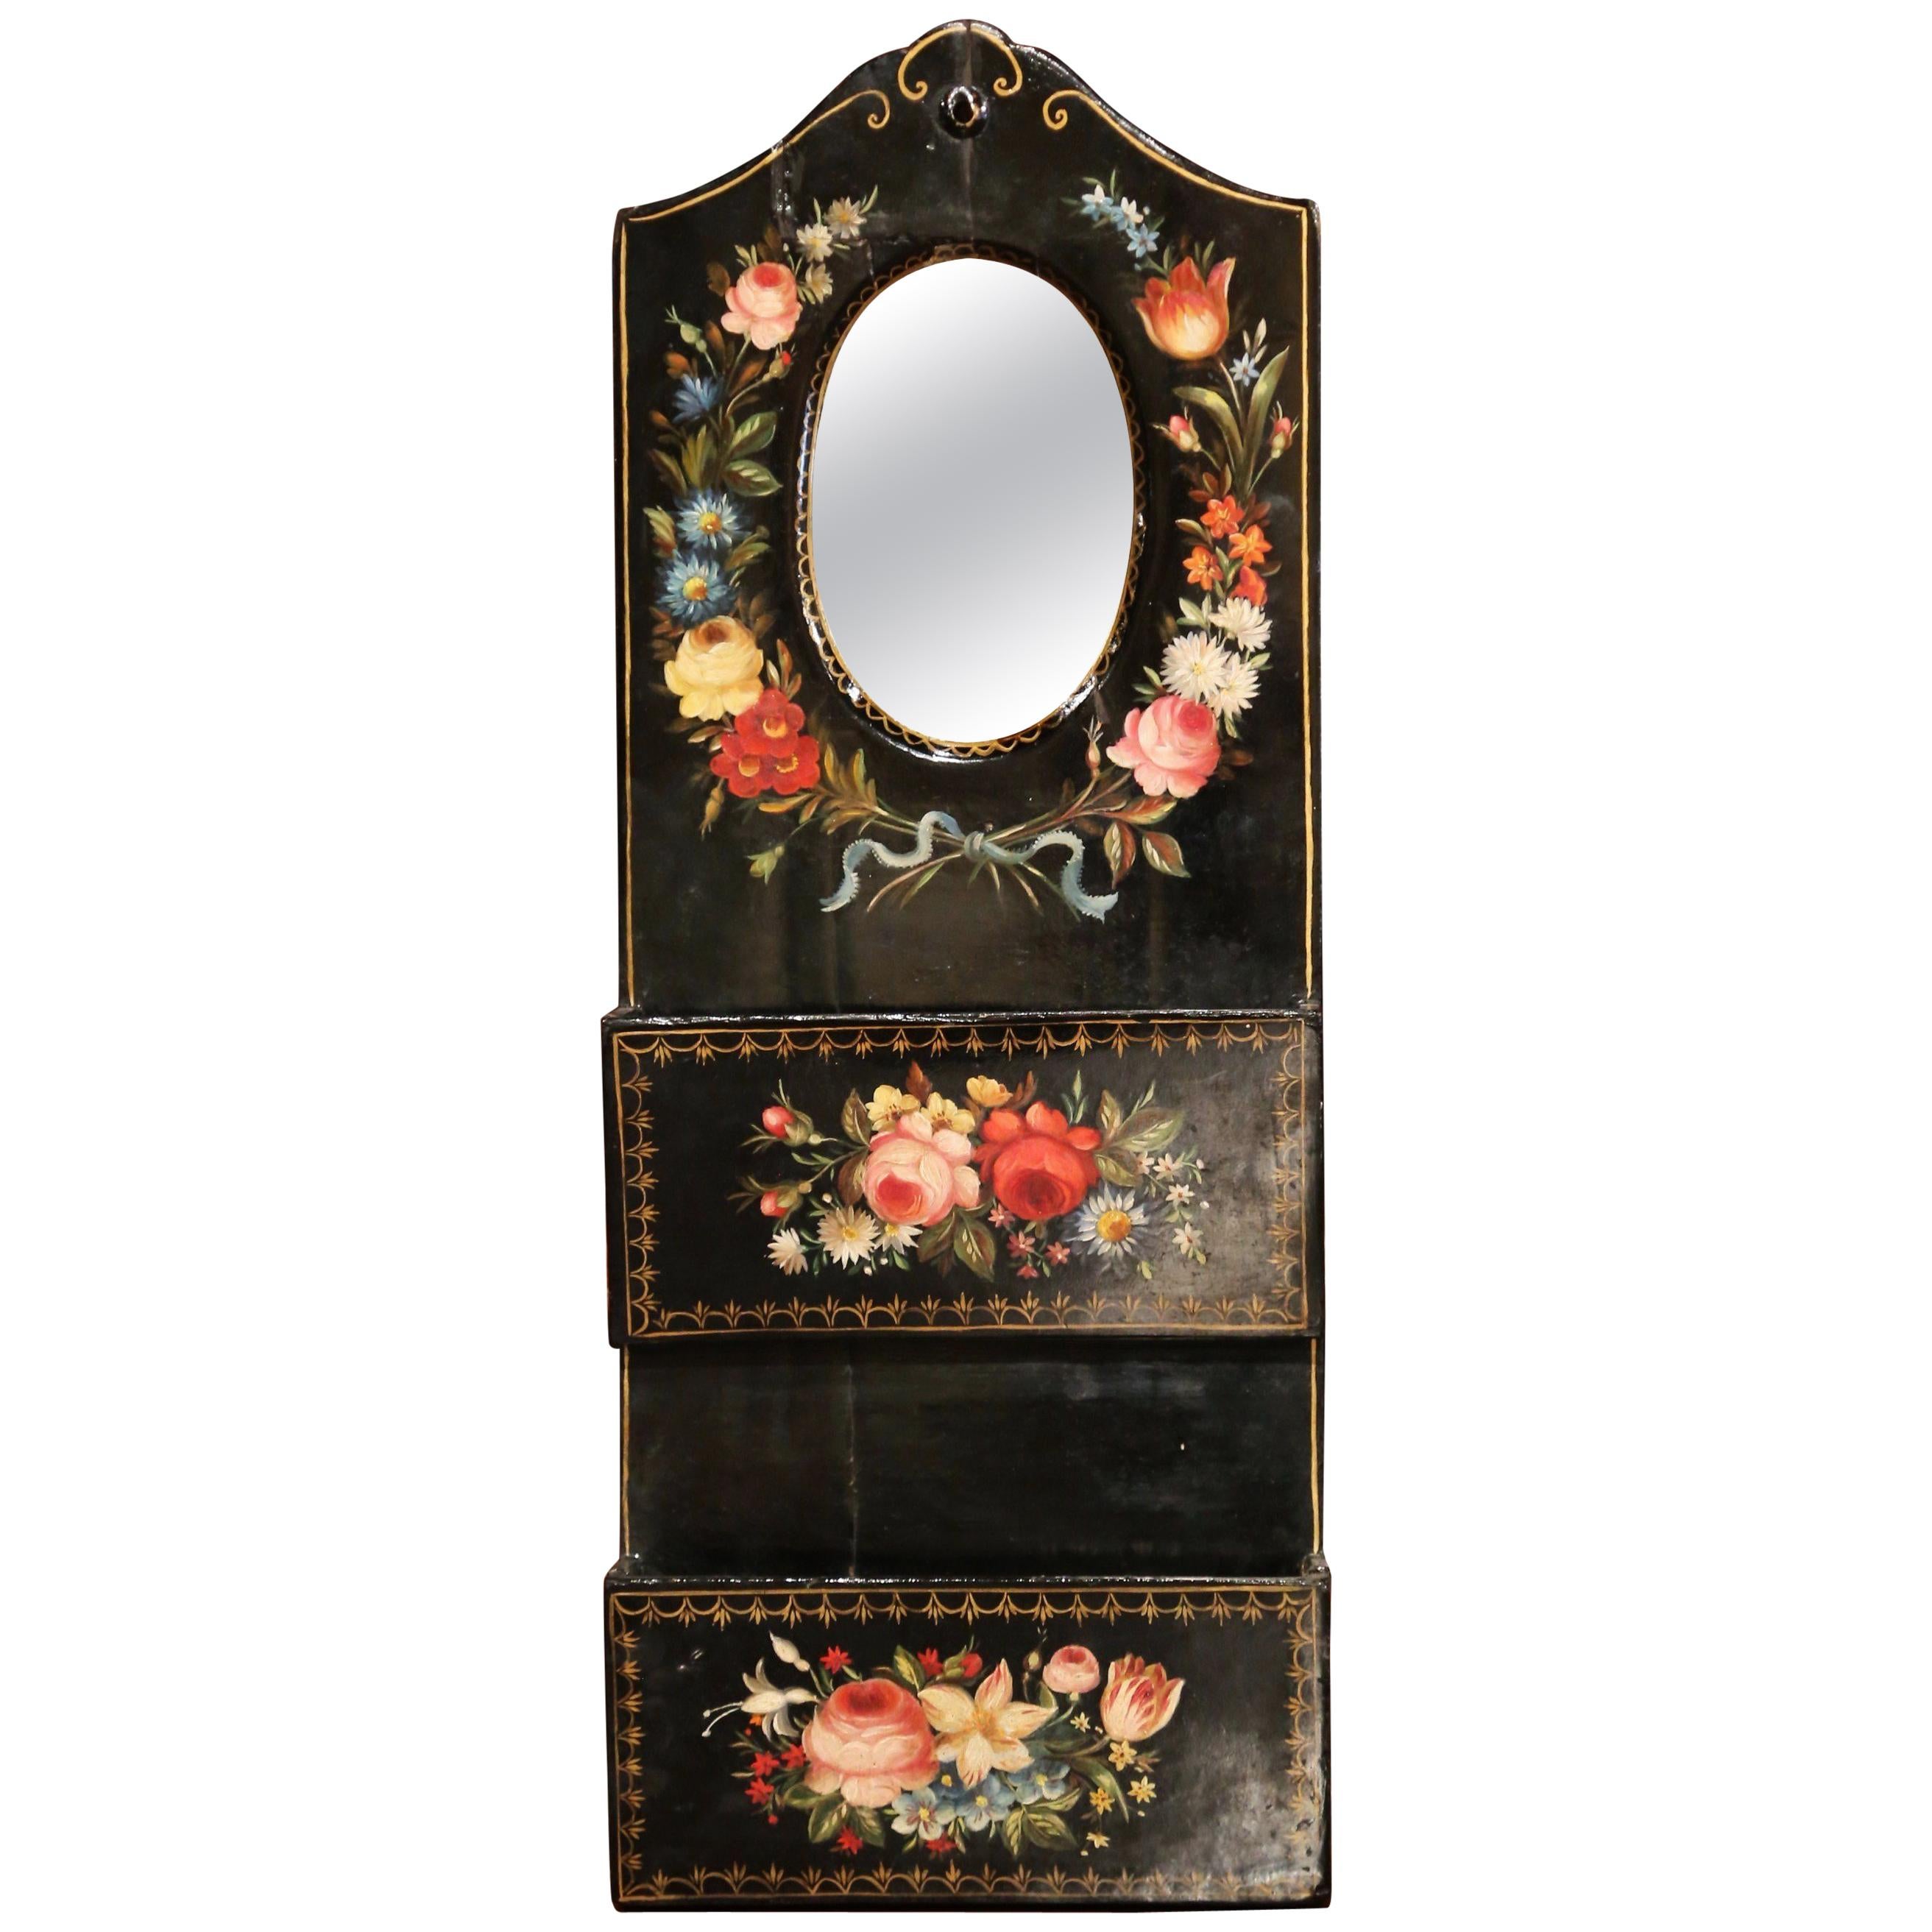 19th Century French Lacquered Mirrored Letter Holder with Painted Floral Motifs